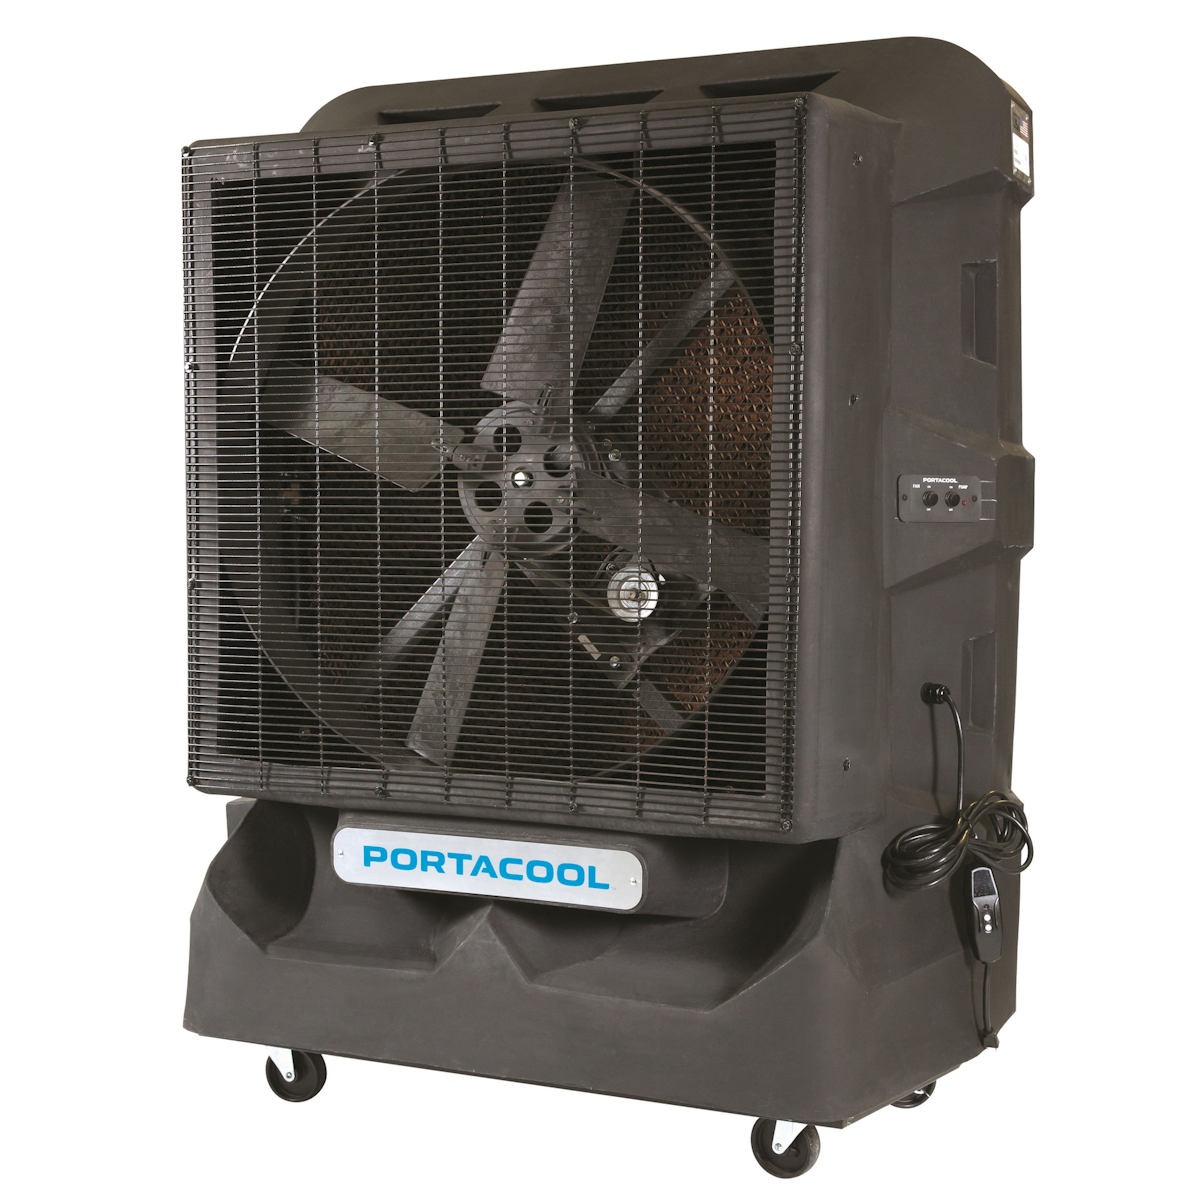 Portacool Cyclone 160 Portable Cooling Solution From: Portacool, LLC